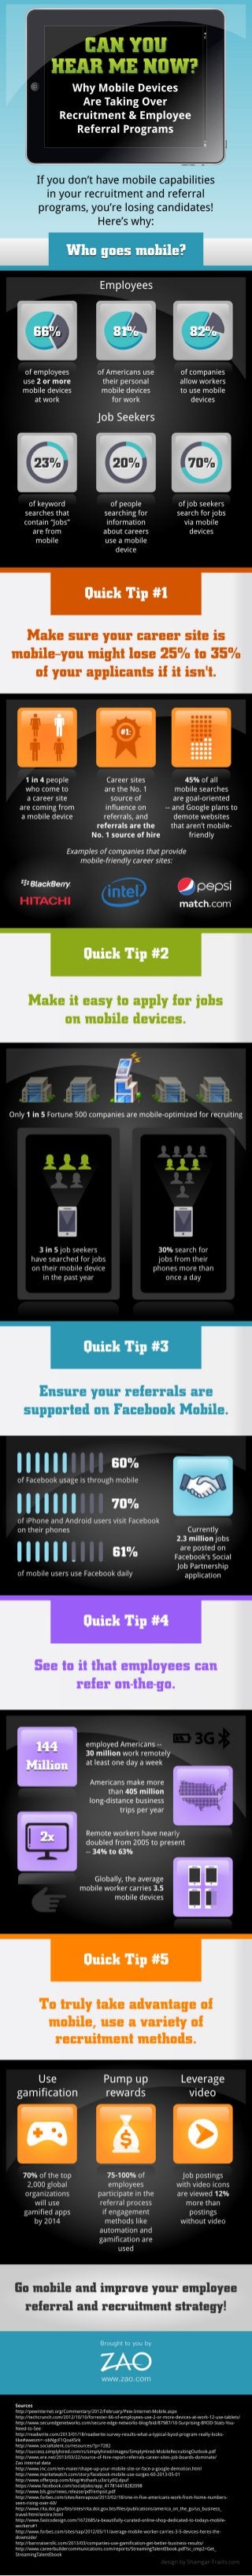 Why Mobile Devices Are Taking Over Recruitment and Employee Referral Programs [INFOGRAPHIC]